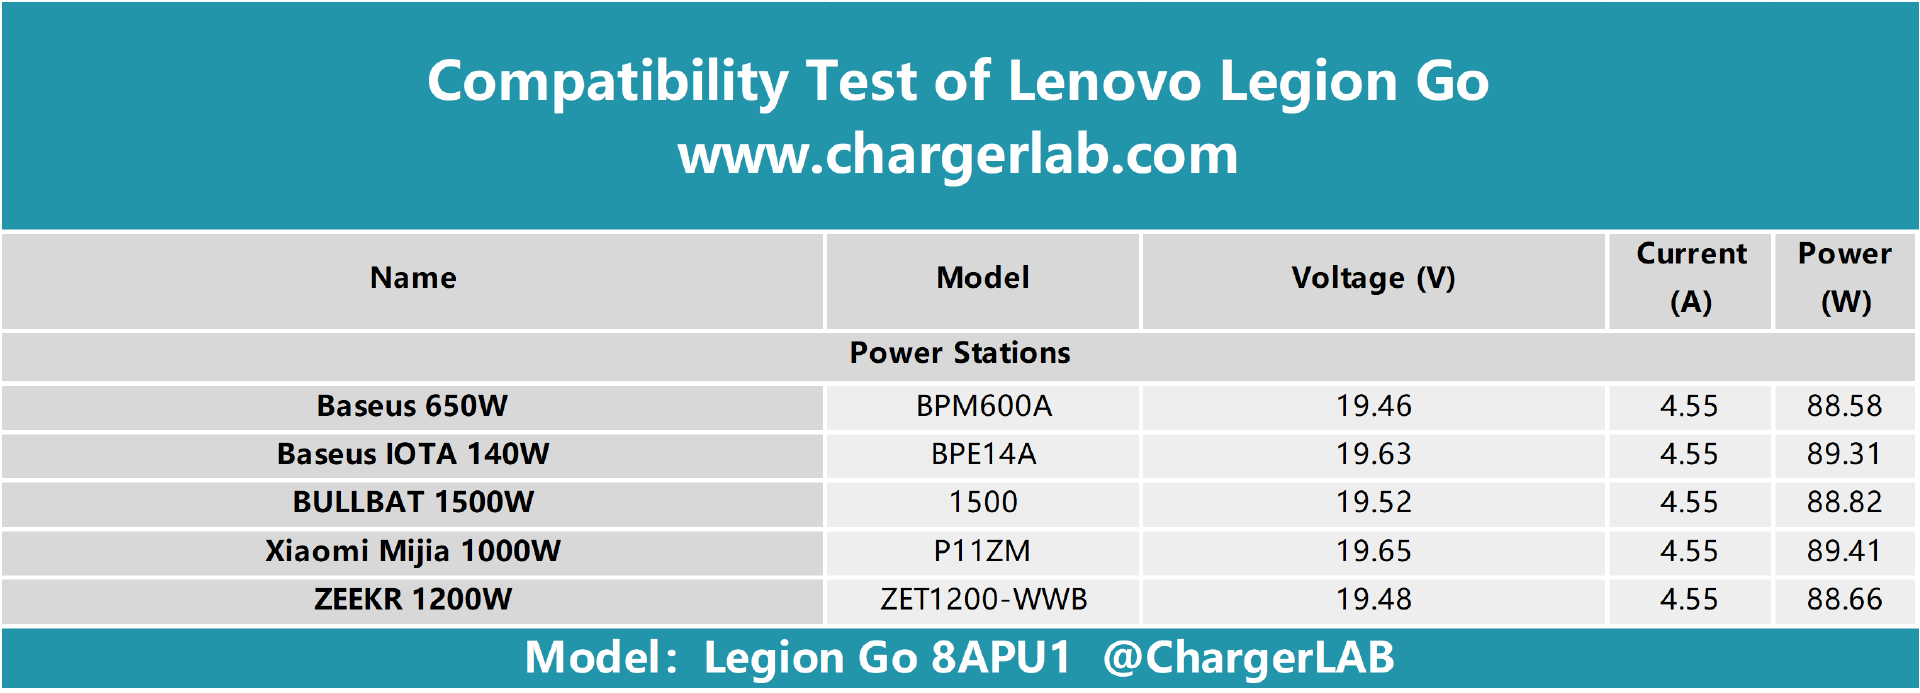 Lenovo Legion Go Charging Test - ChargerLAB Compatibility 100-Chargerlab